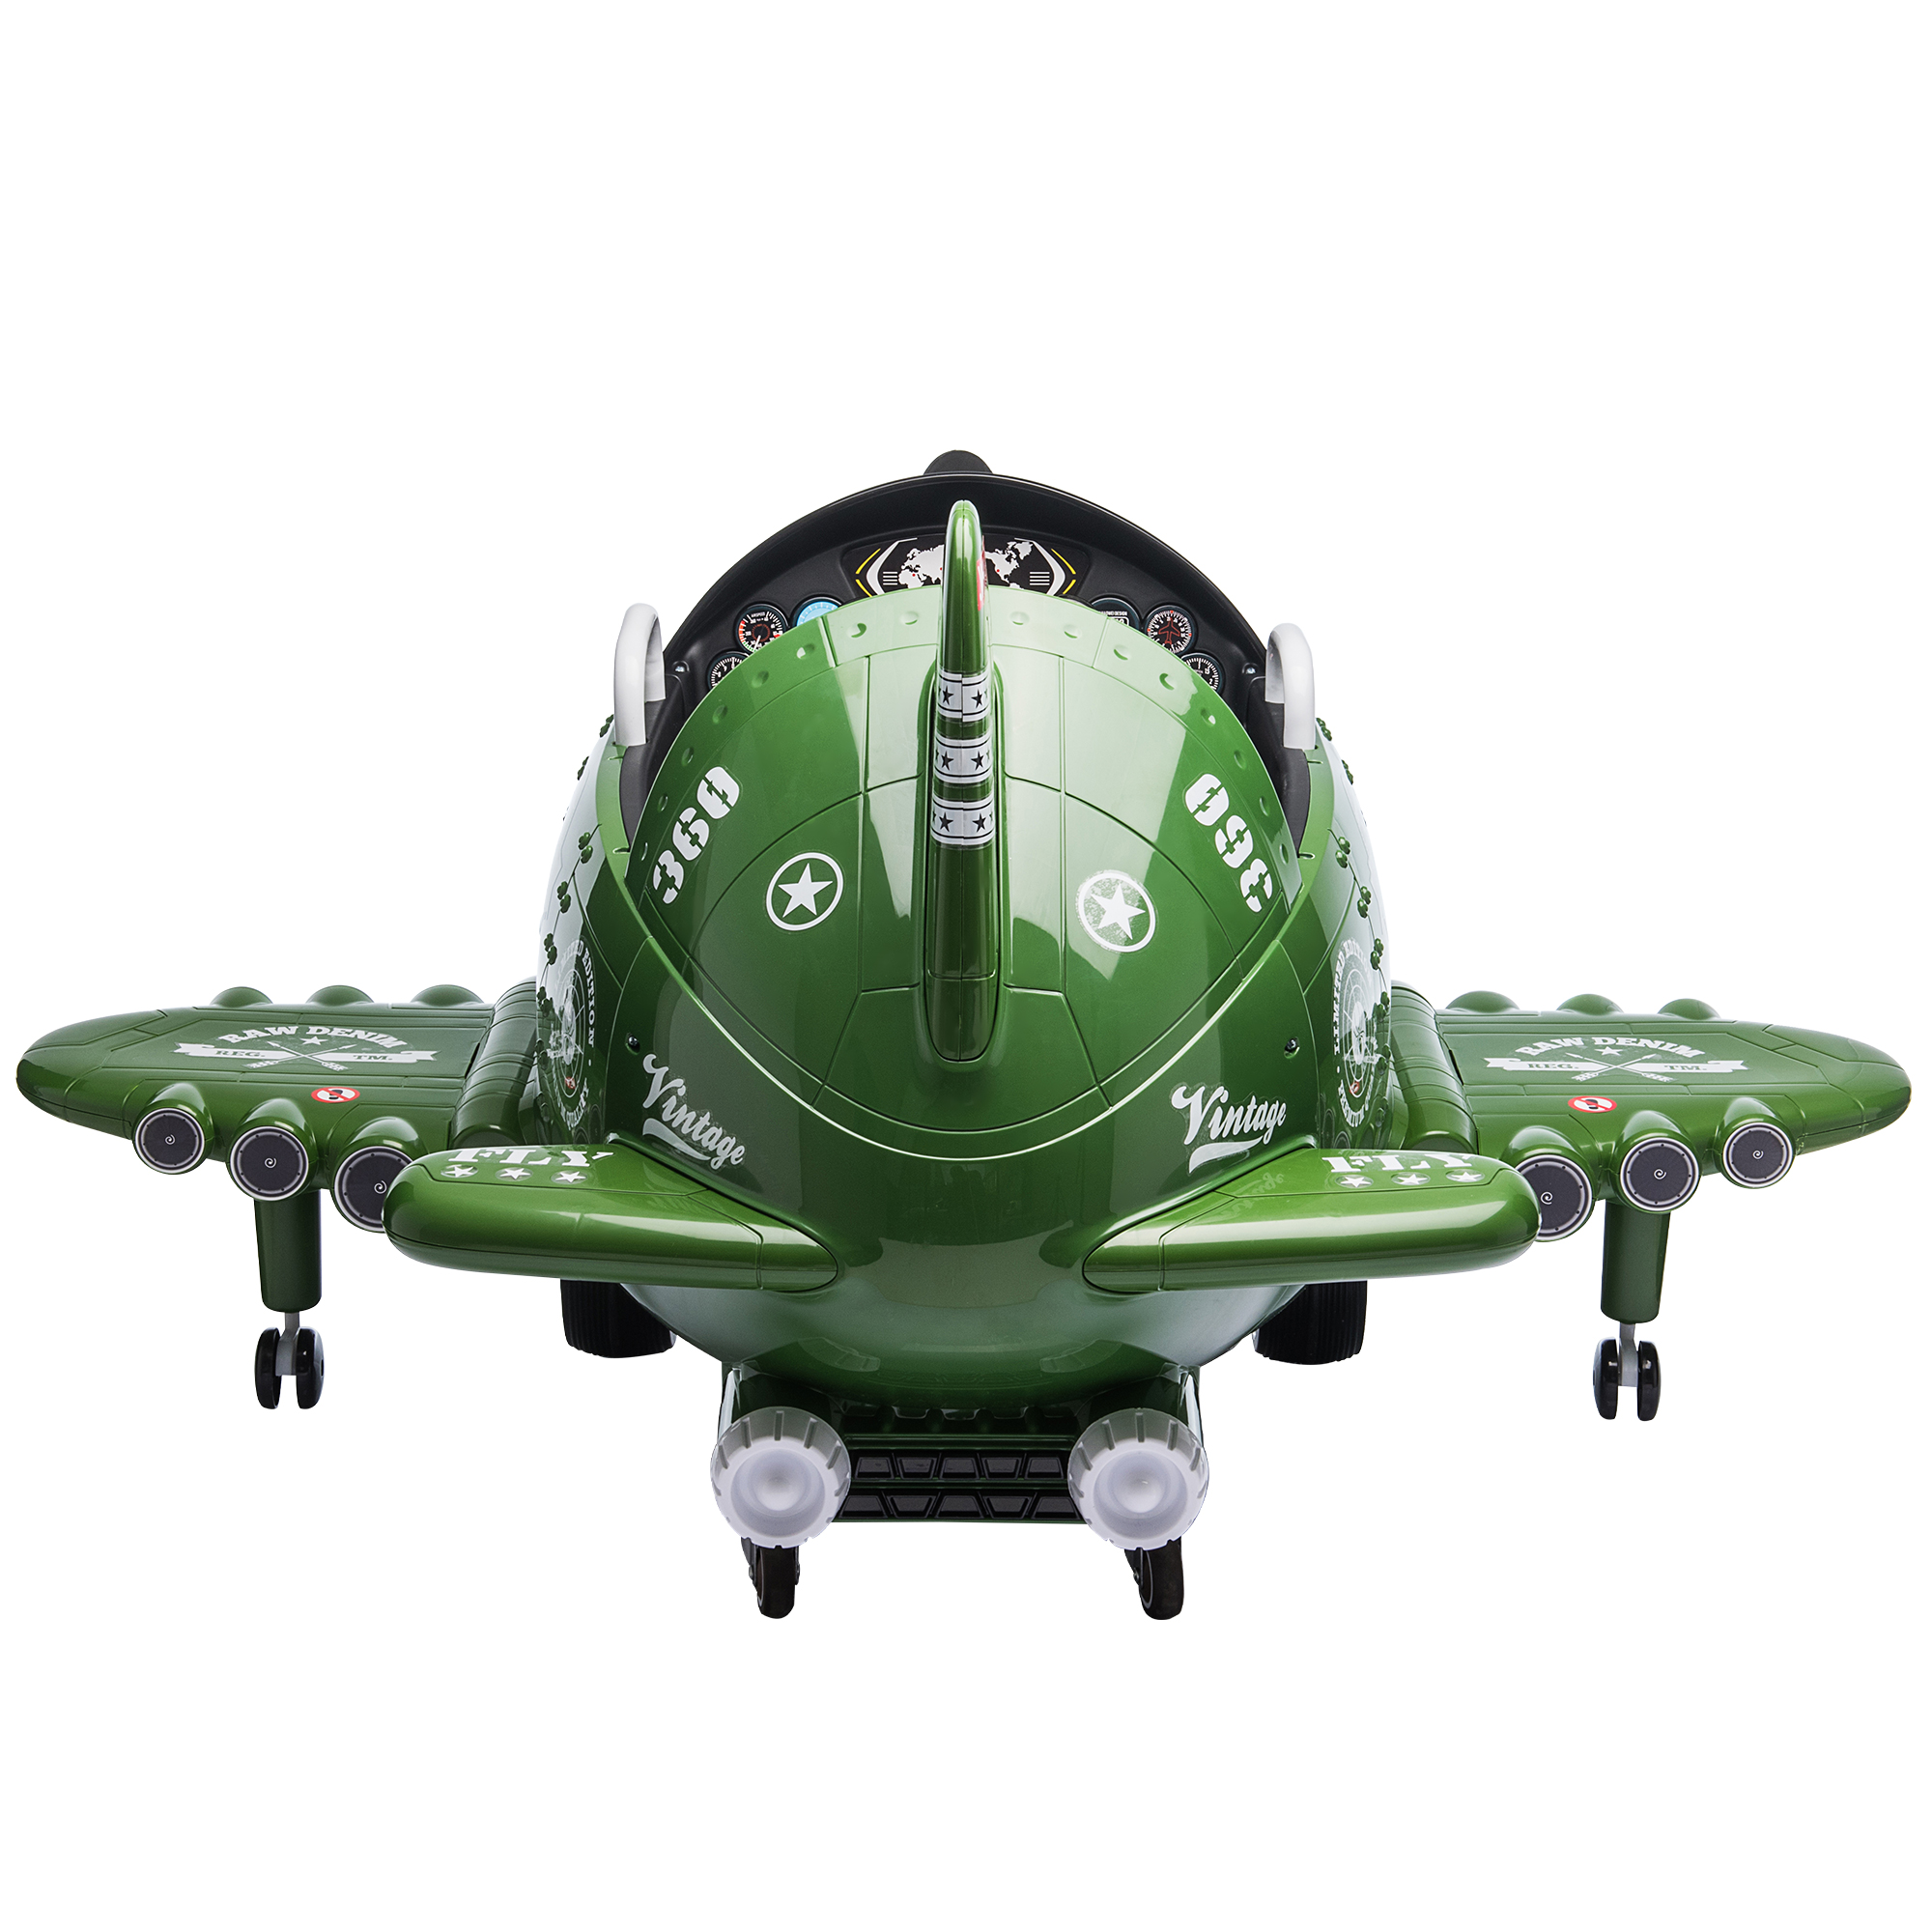 Tobbi Children's 12V Powered Electric Ride on Toy Plane Car with Remote Control Toddler Aircraft Baby Carriage , Music,Green